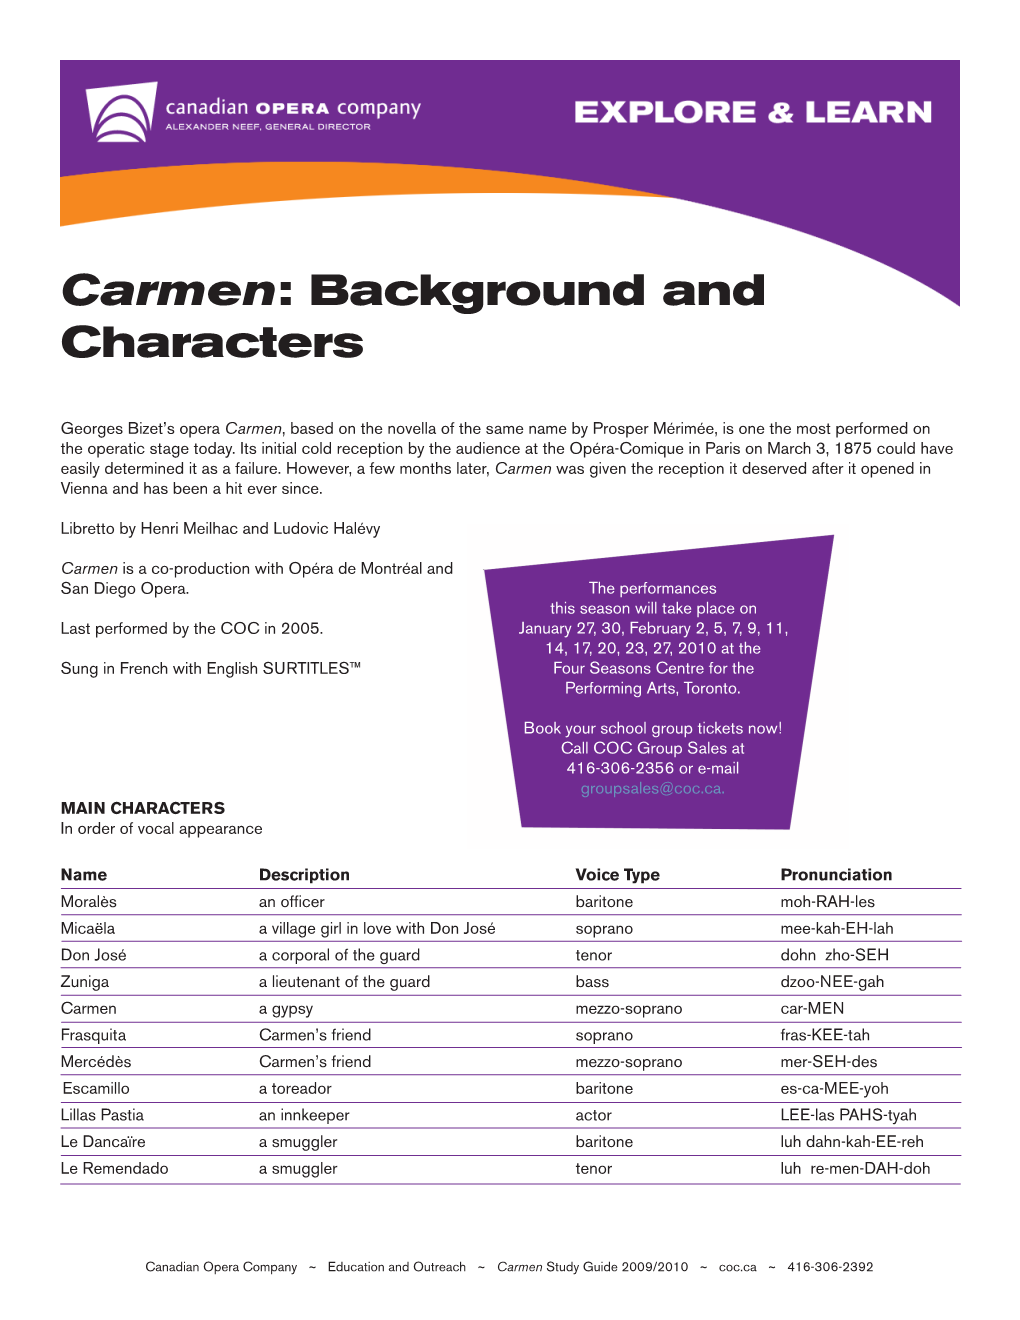 Carmen: Background and Characters